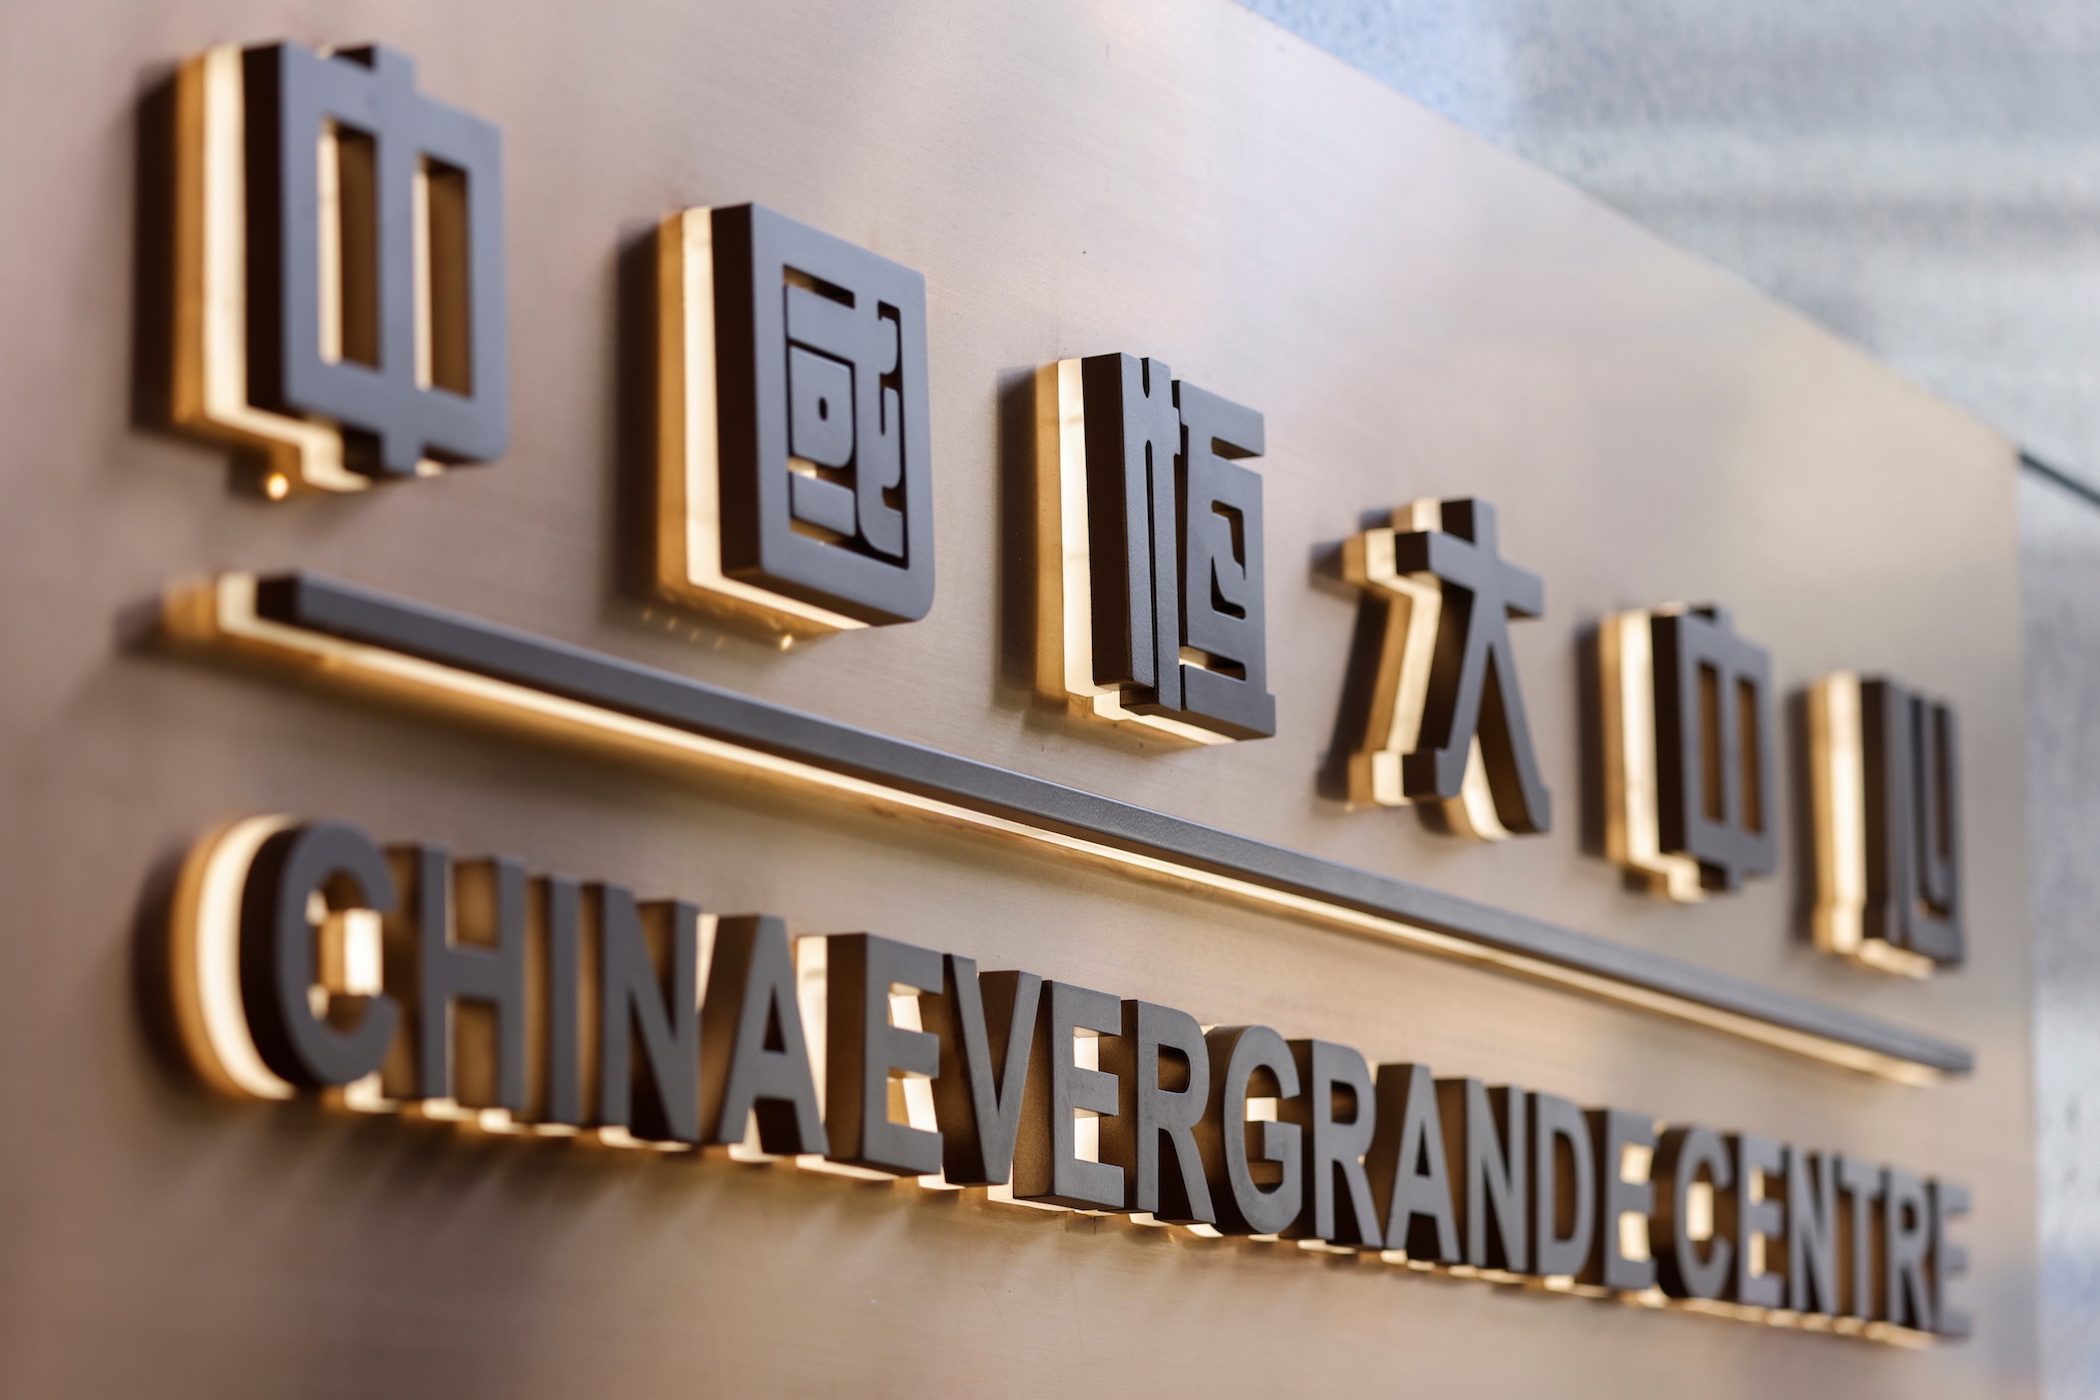 EXPLAINER: What’s next for China Evergrande after missing coupon payments